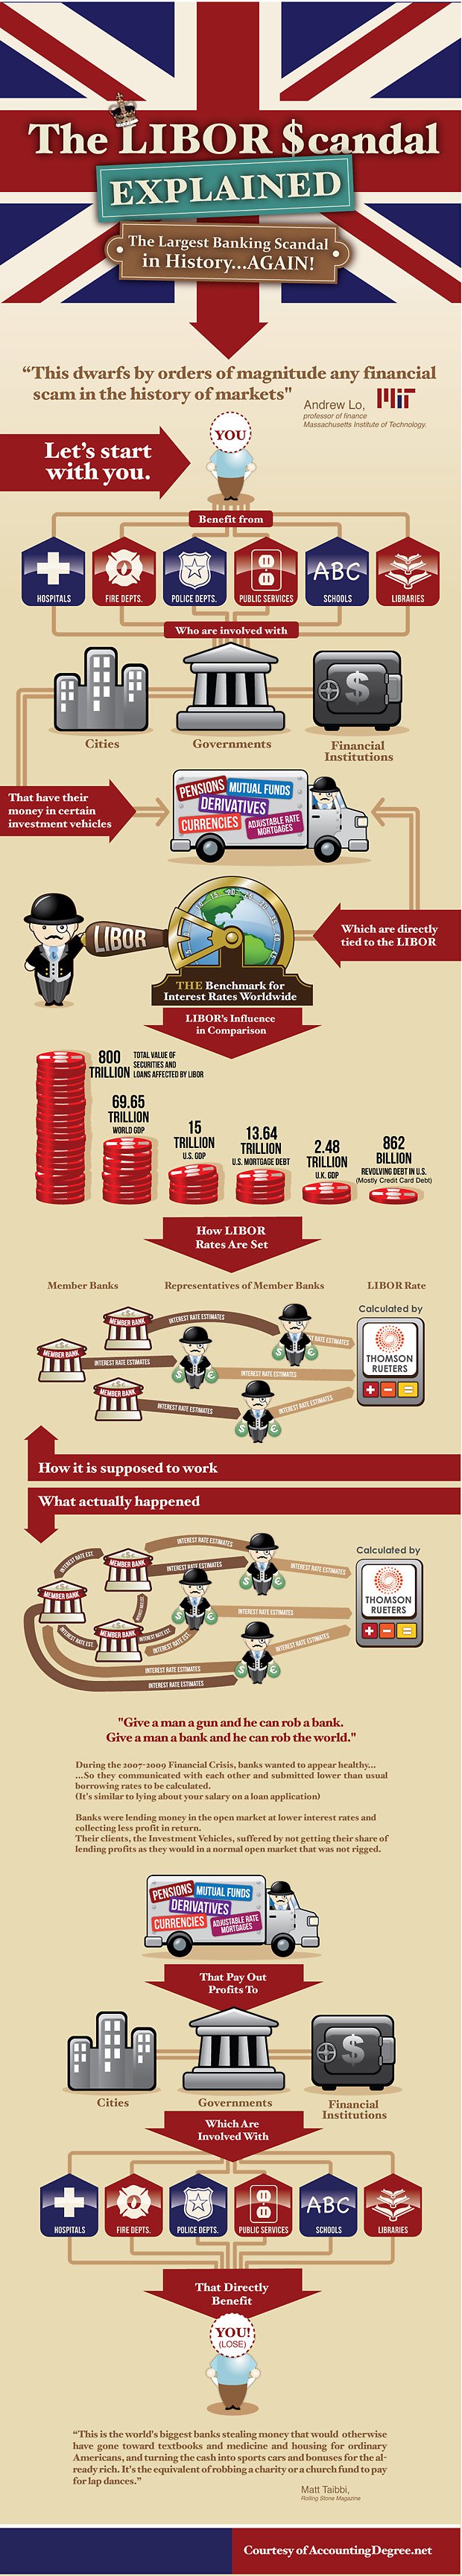 liborscandalgraphic615cs071112 1 - The LIBOR Scandal Explained in One Simple Infographic